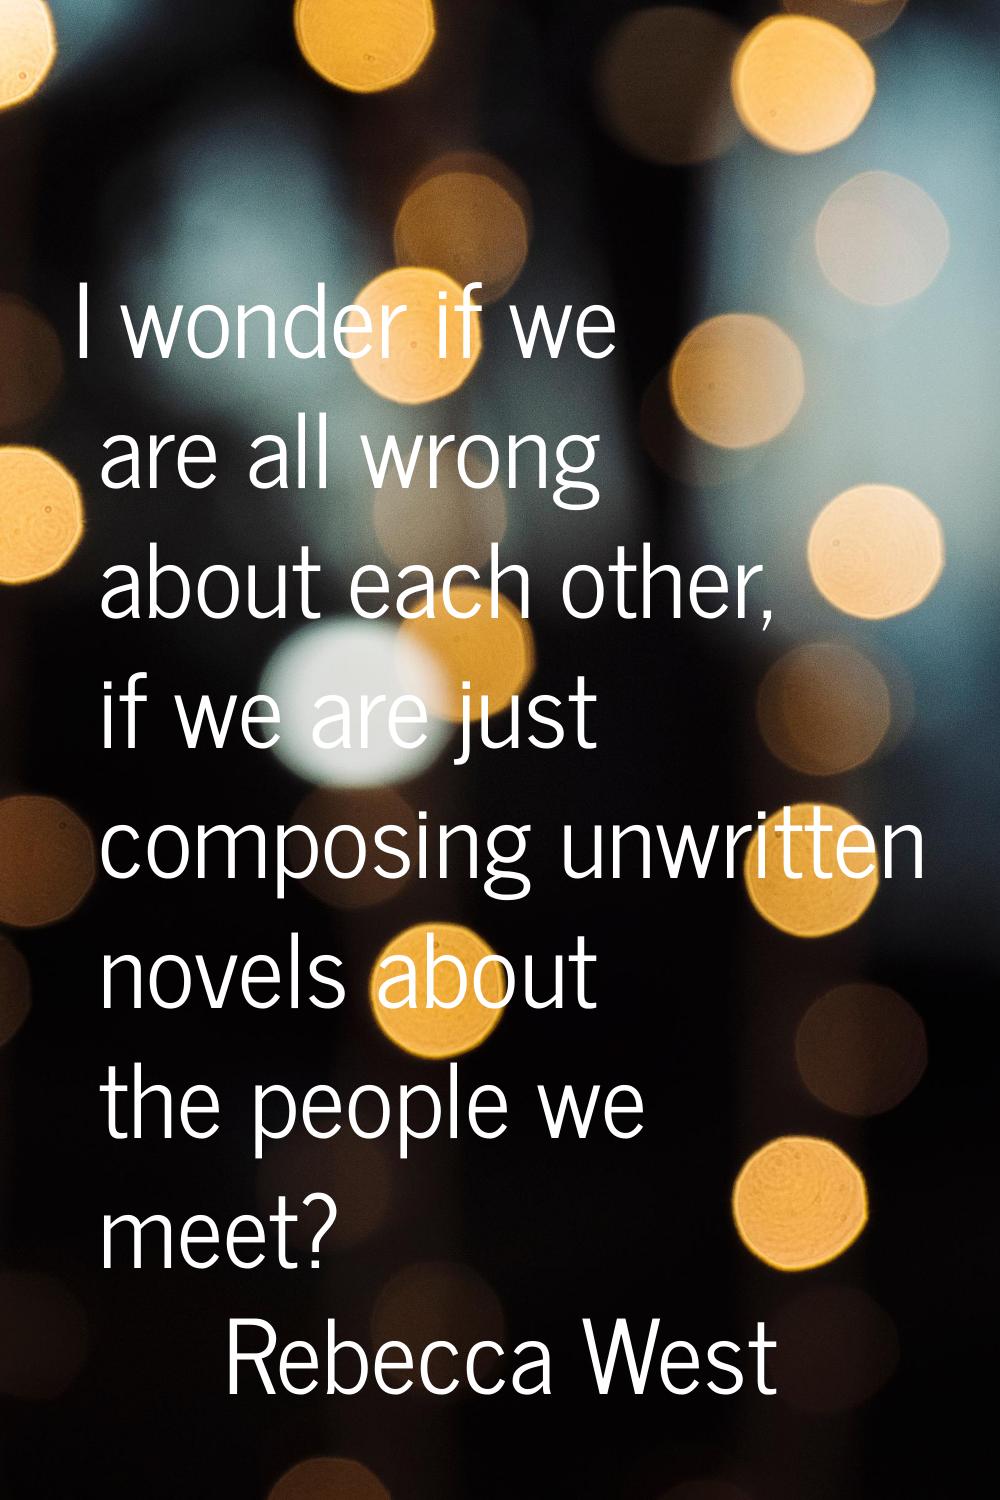 I wonder if we are all wrong about each other, if we are just composing unwritten novels about the 